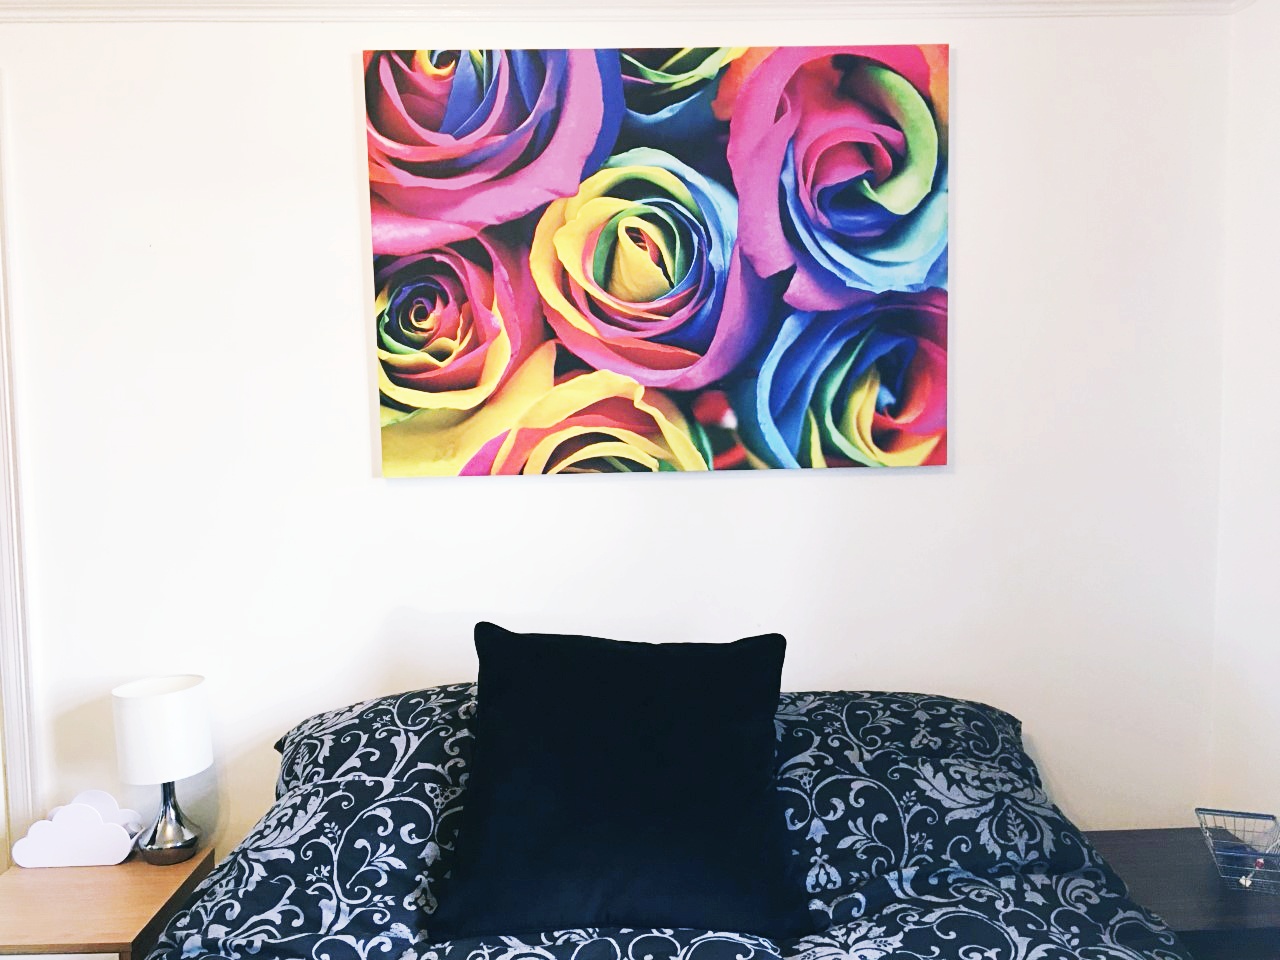 A photo taken in my room of the wall where the Photowall canvas has been hung. There's a double bed with the pillows against the wall, with a black and grey damask duvet cover. There are bedside tables to either side. The canvas is large, though not quite the width of the bed. It features colourful rainbow roses.